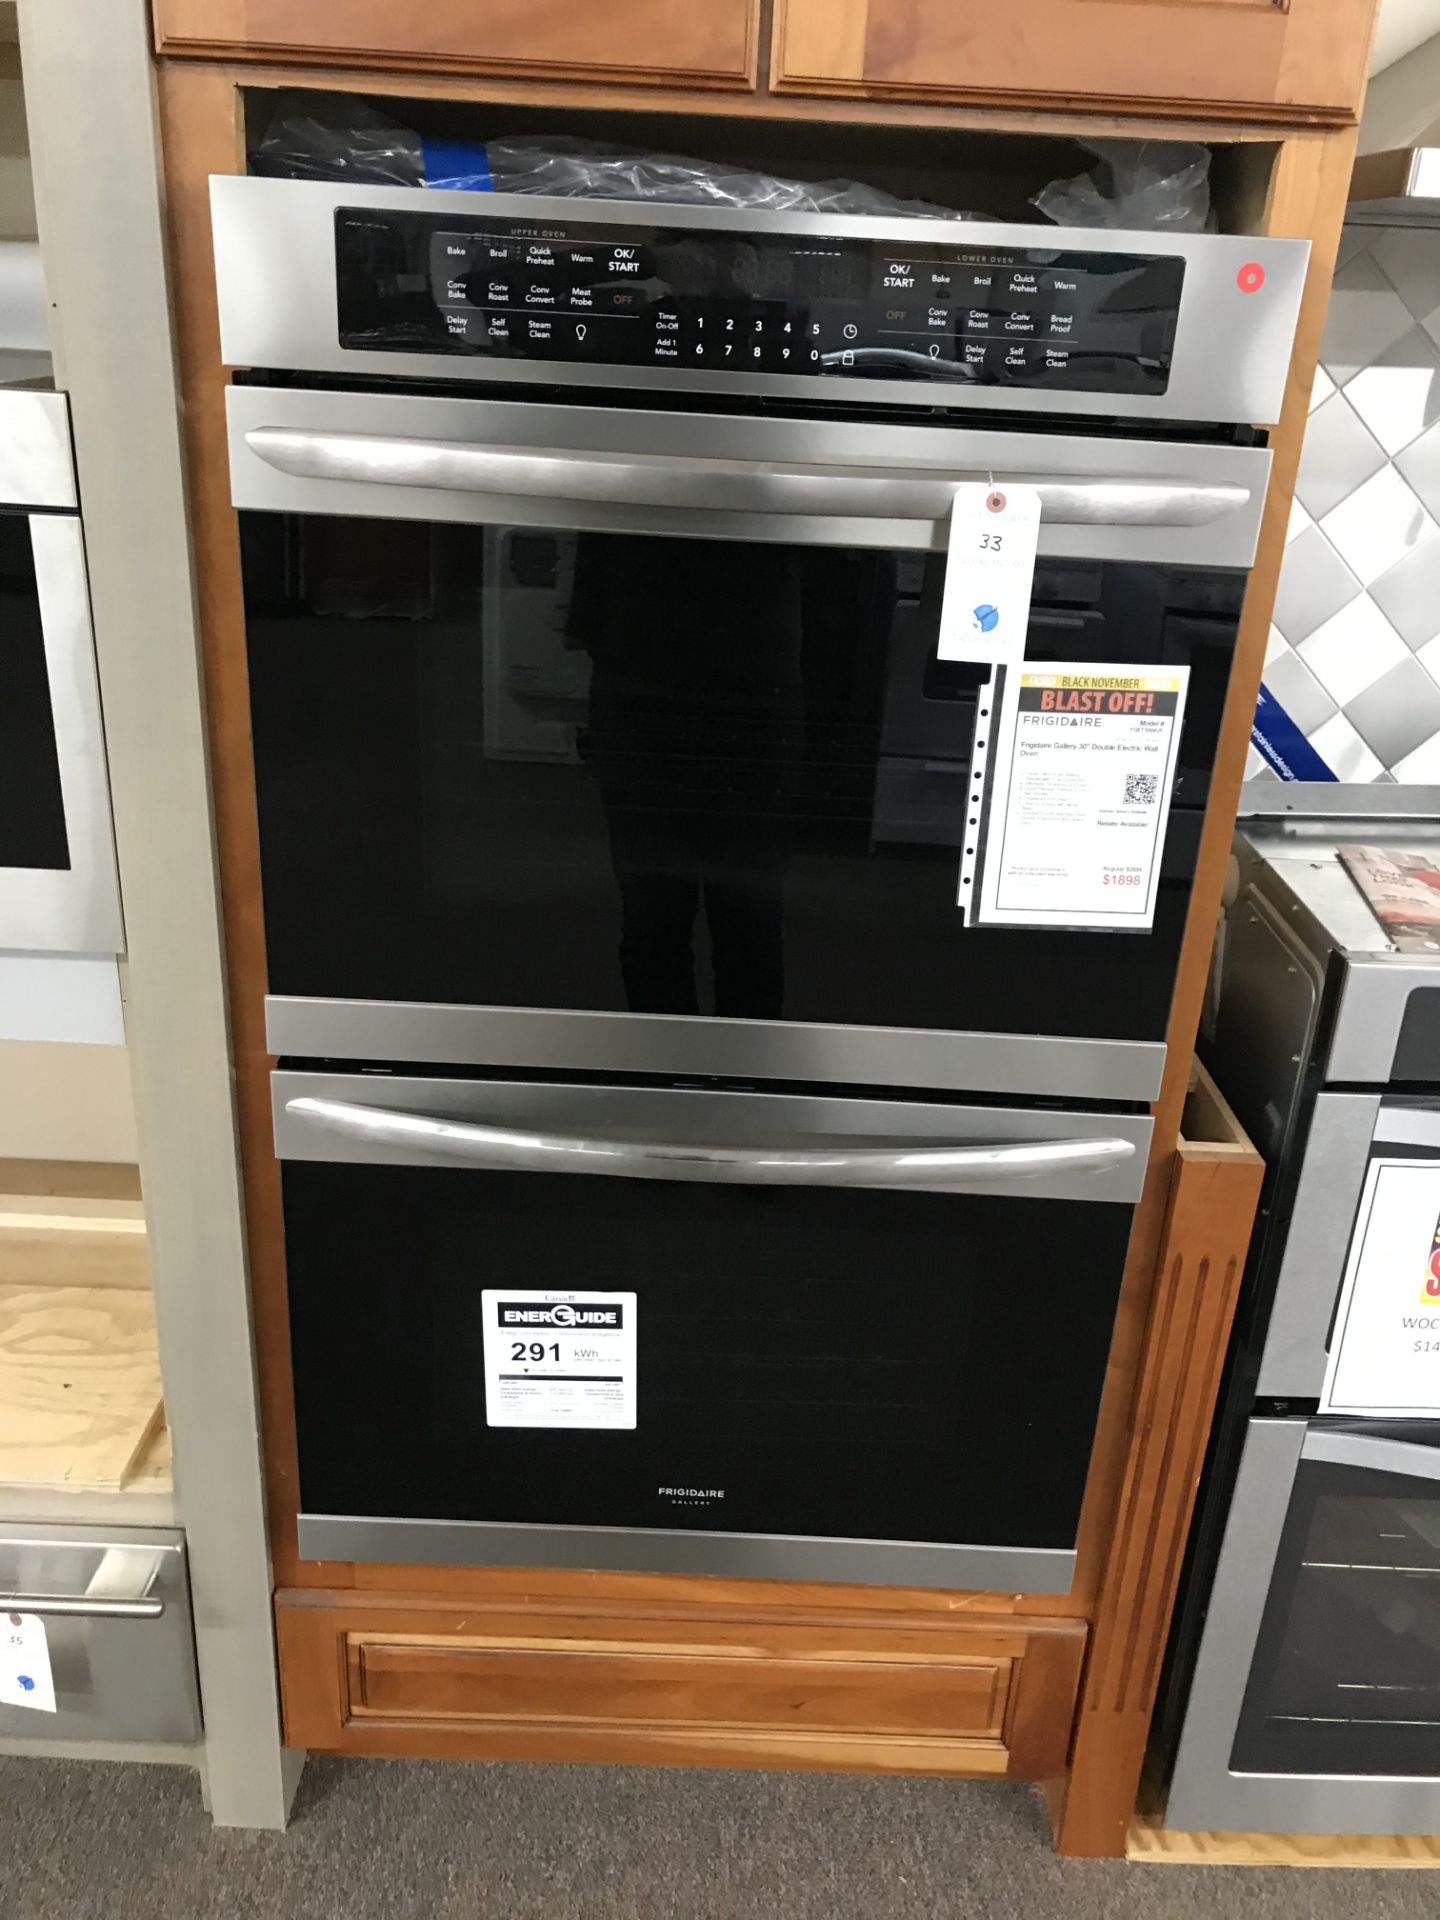 FrigdAire #FGET3066UF Electric Double Wall Oven 30"W x 24.75"D x 50.44"H (Retail Price: $2,899)